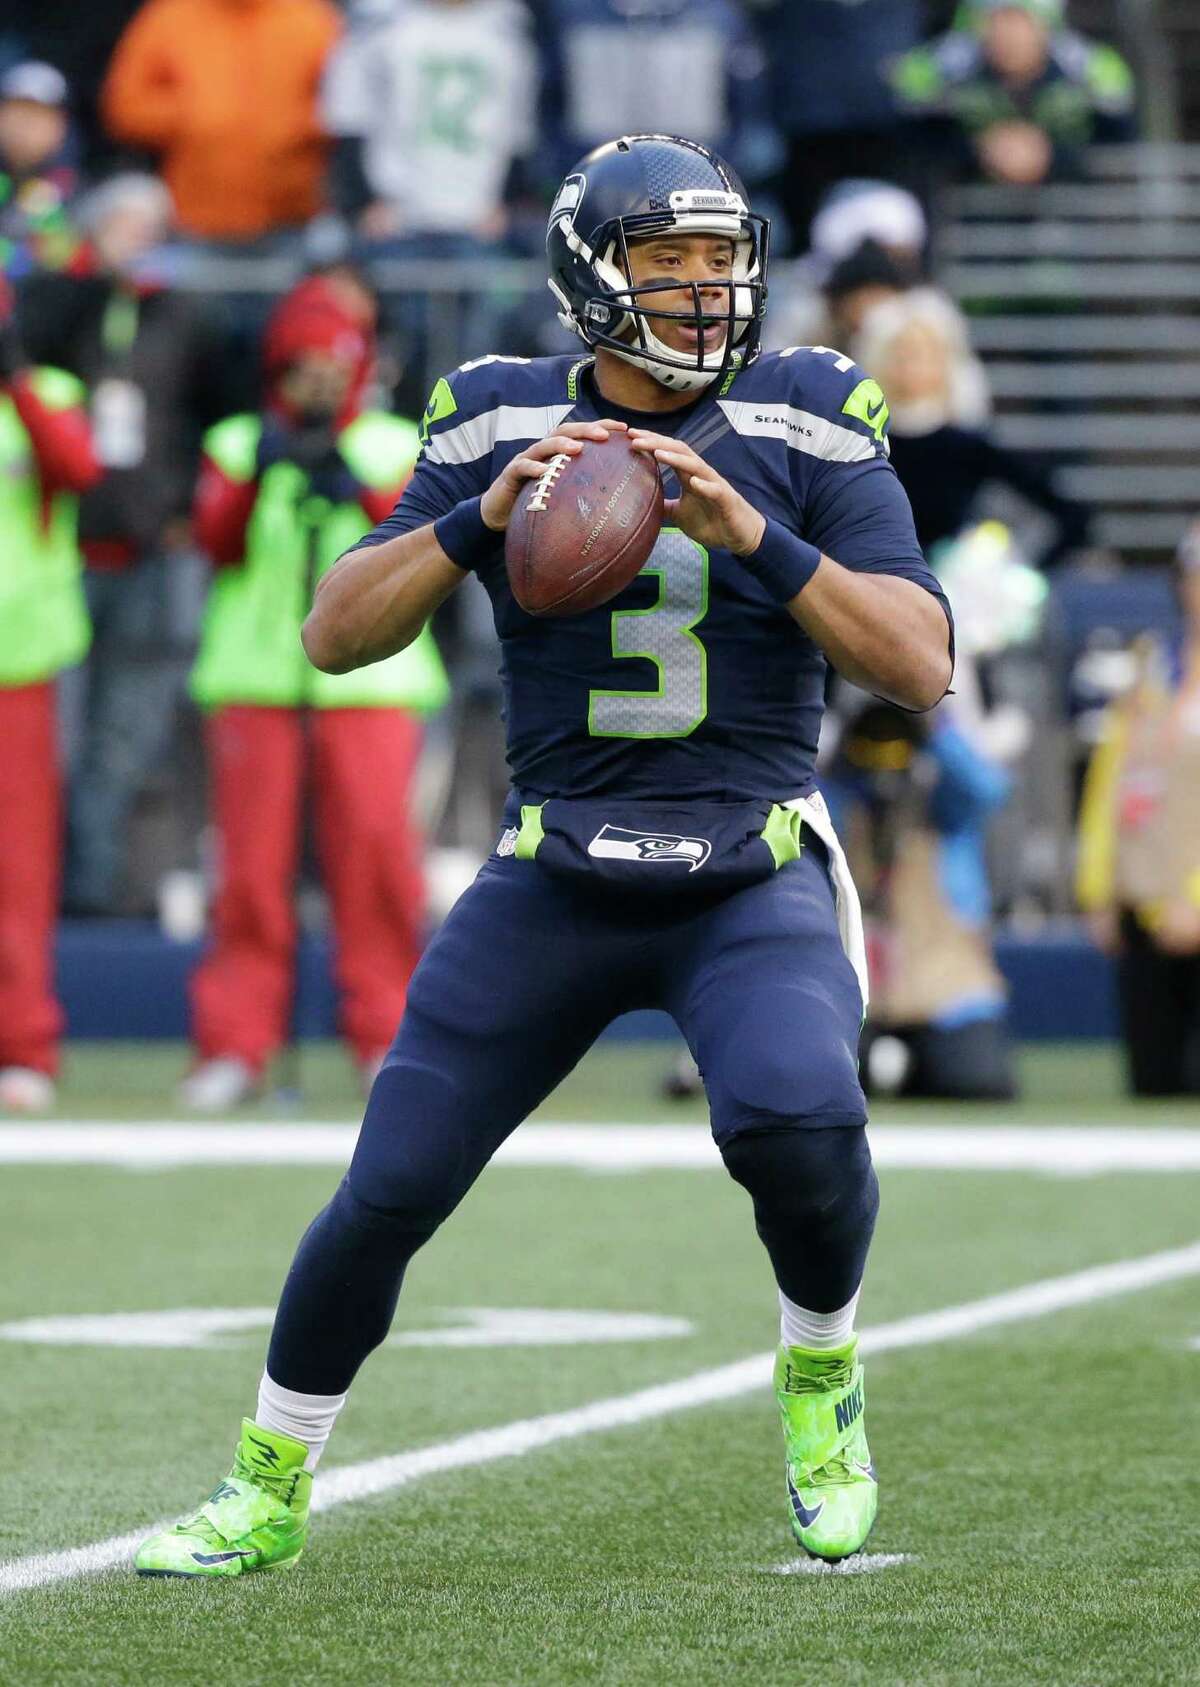 Seattle Seahawks quarterback Russell Wilson in action against the Arizona Cardinals in an NFL football game, Saturday, Dec. 24, 2016, in Seattle. (AP Photo/Ted S. Warren)